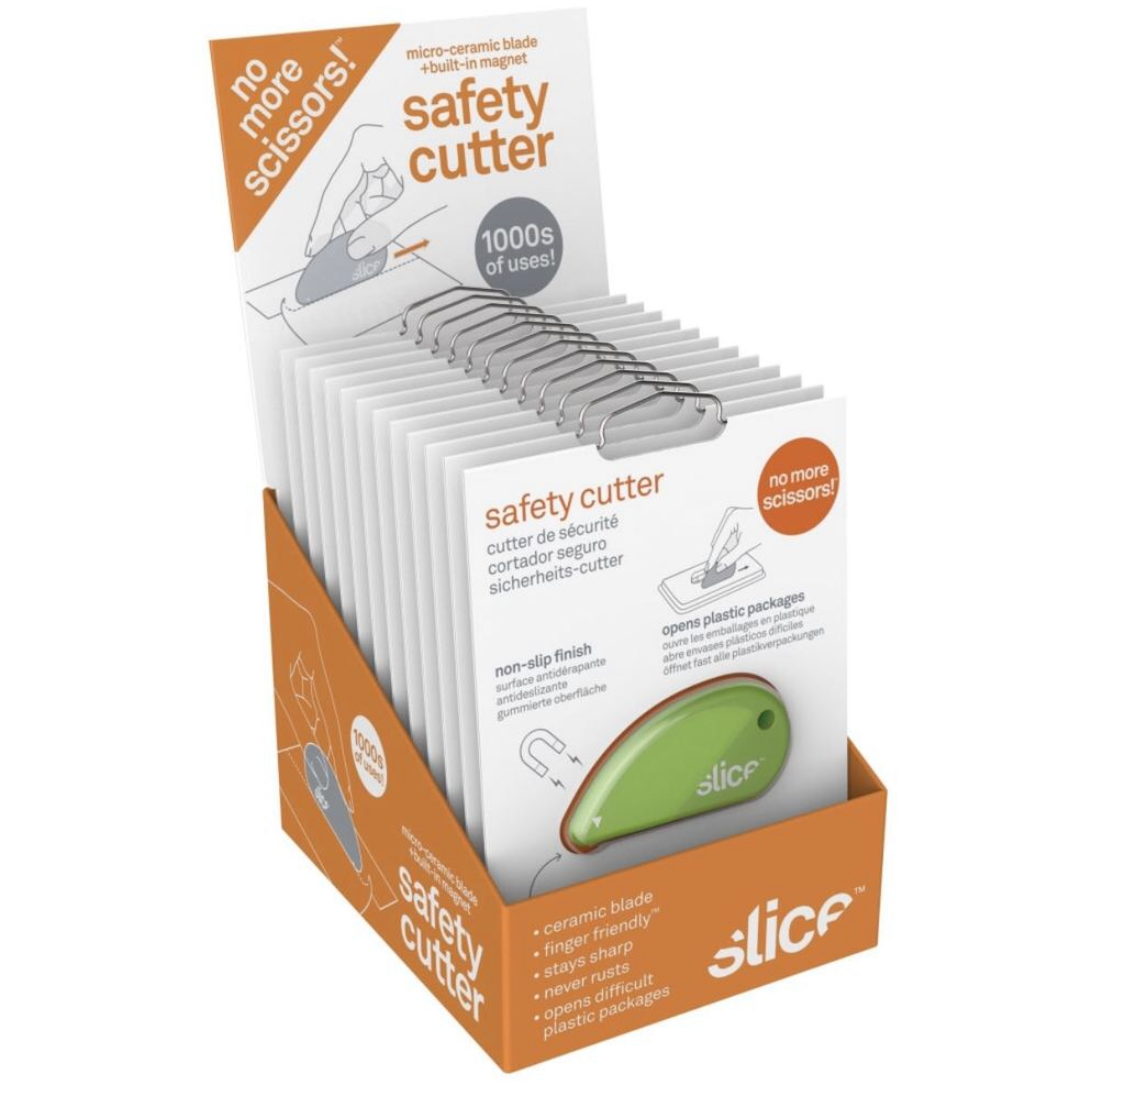 Slice 00100 Safety Cutter Counter Display (12 Cutters) - DaltonSafety